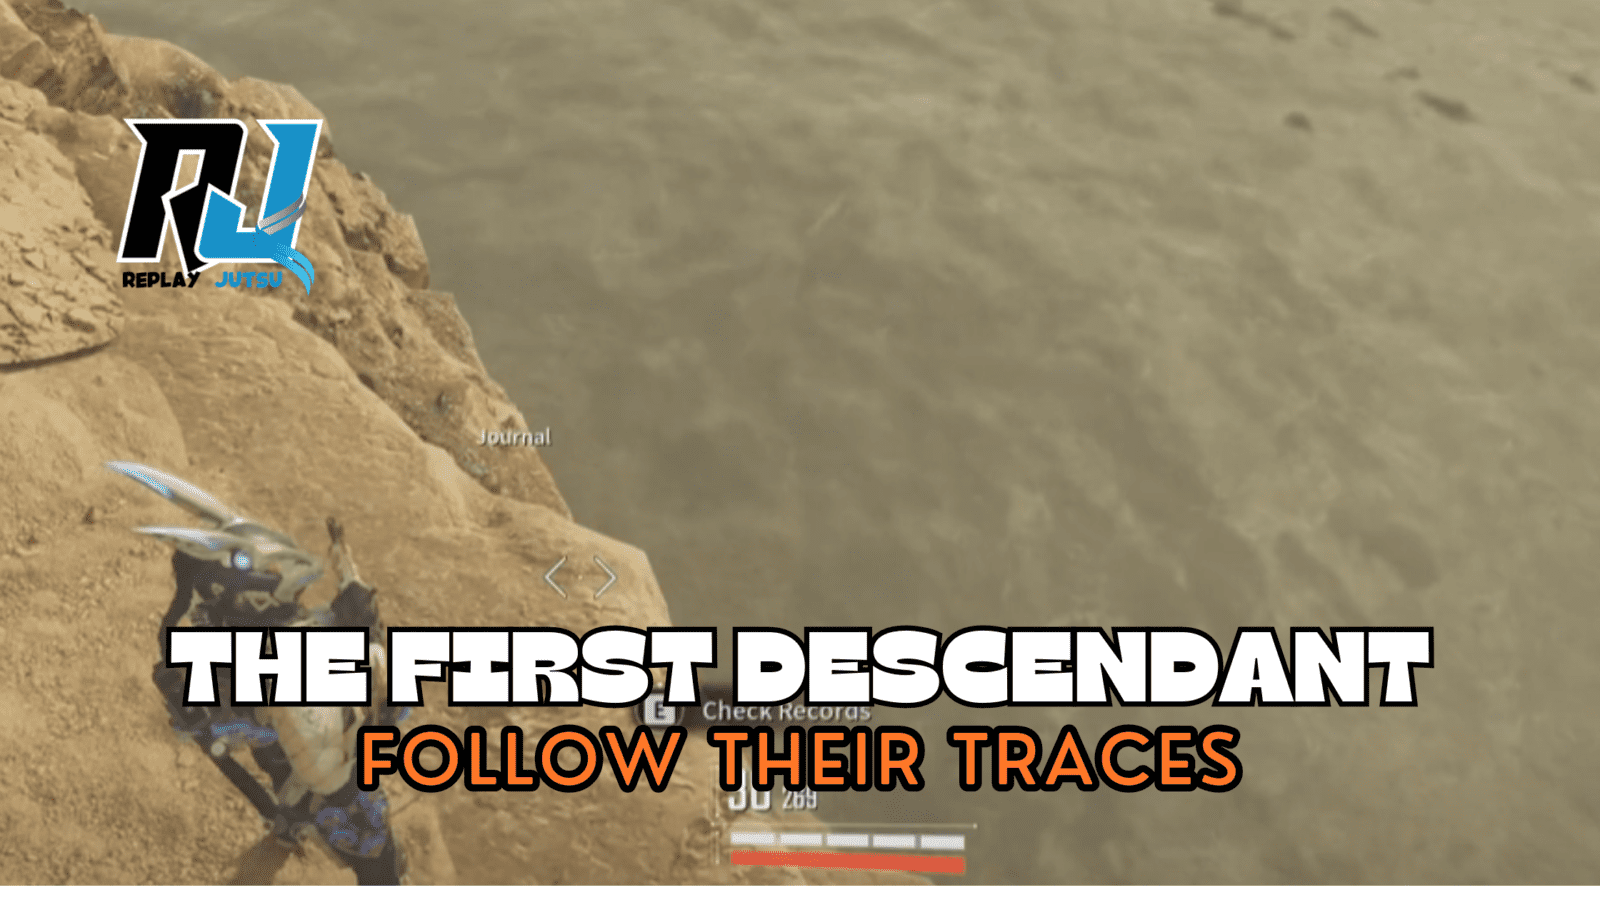 How To Complete Follow Their Traces in The First Descendant - Find Bunny Records